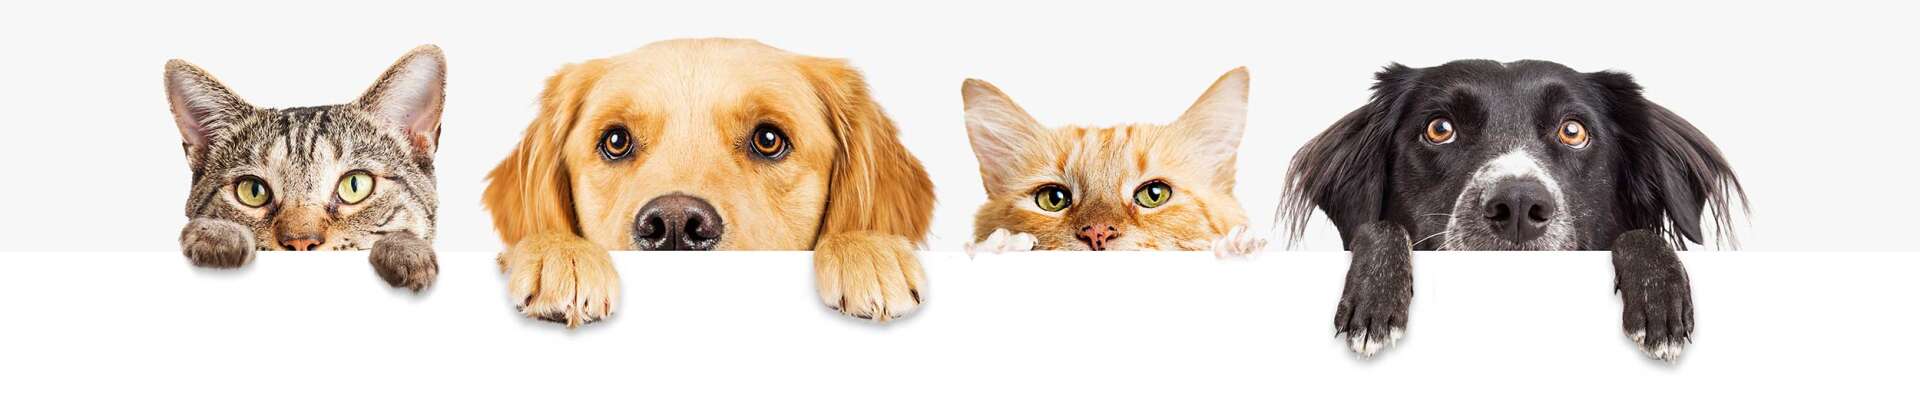 Dogs and cats peeking out from behind a white wall